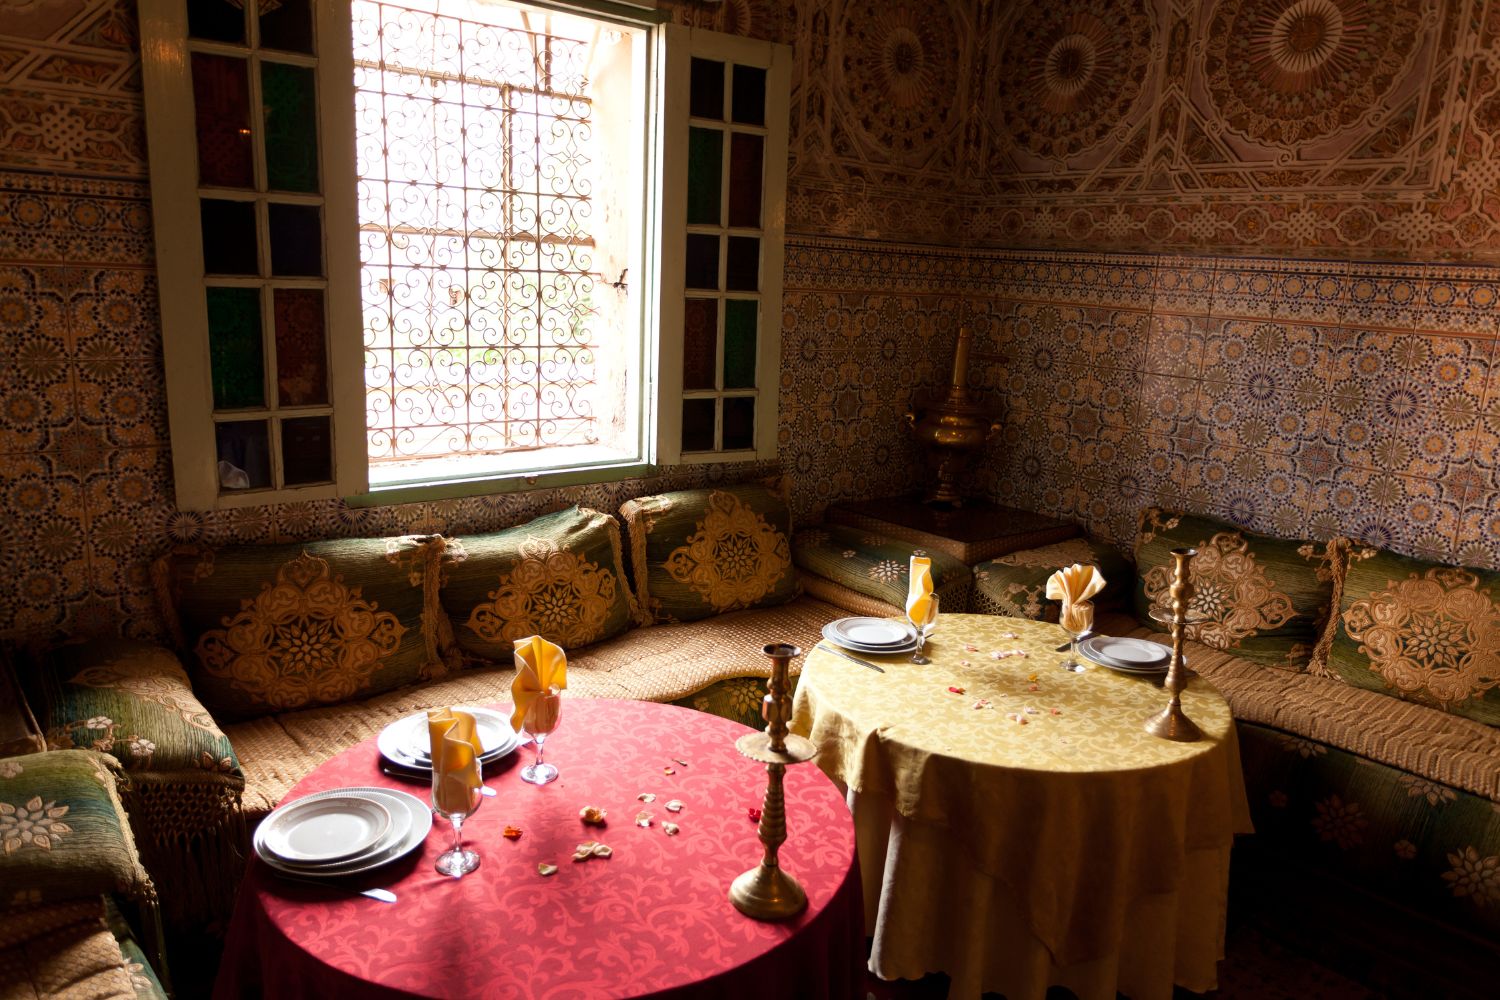 Inside a traditional Moroccan house prepared for visitors